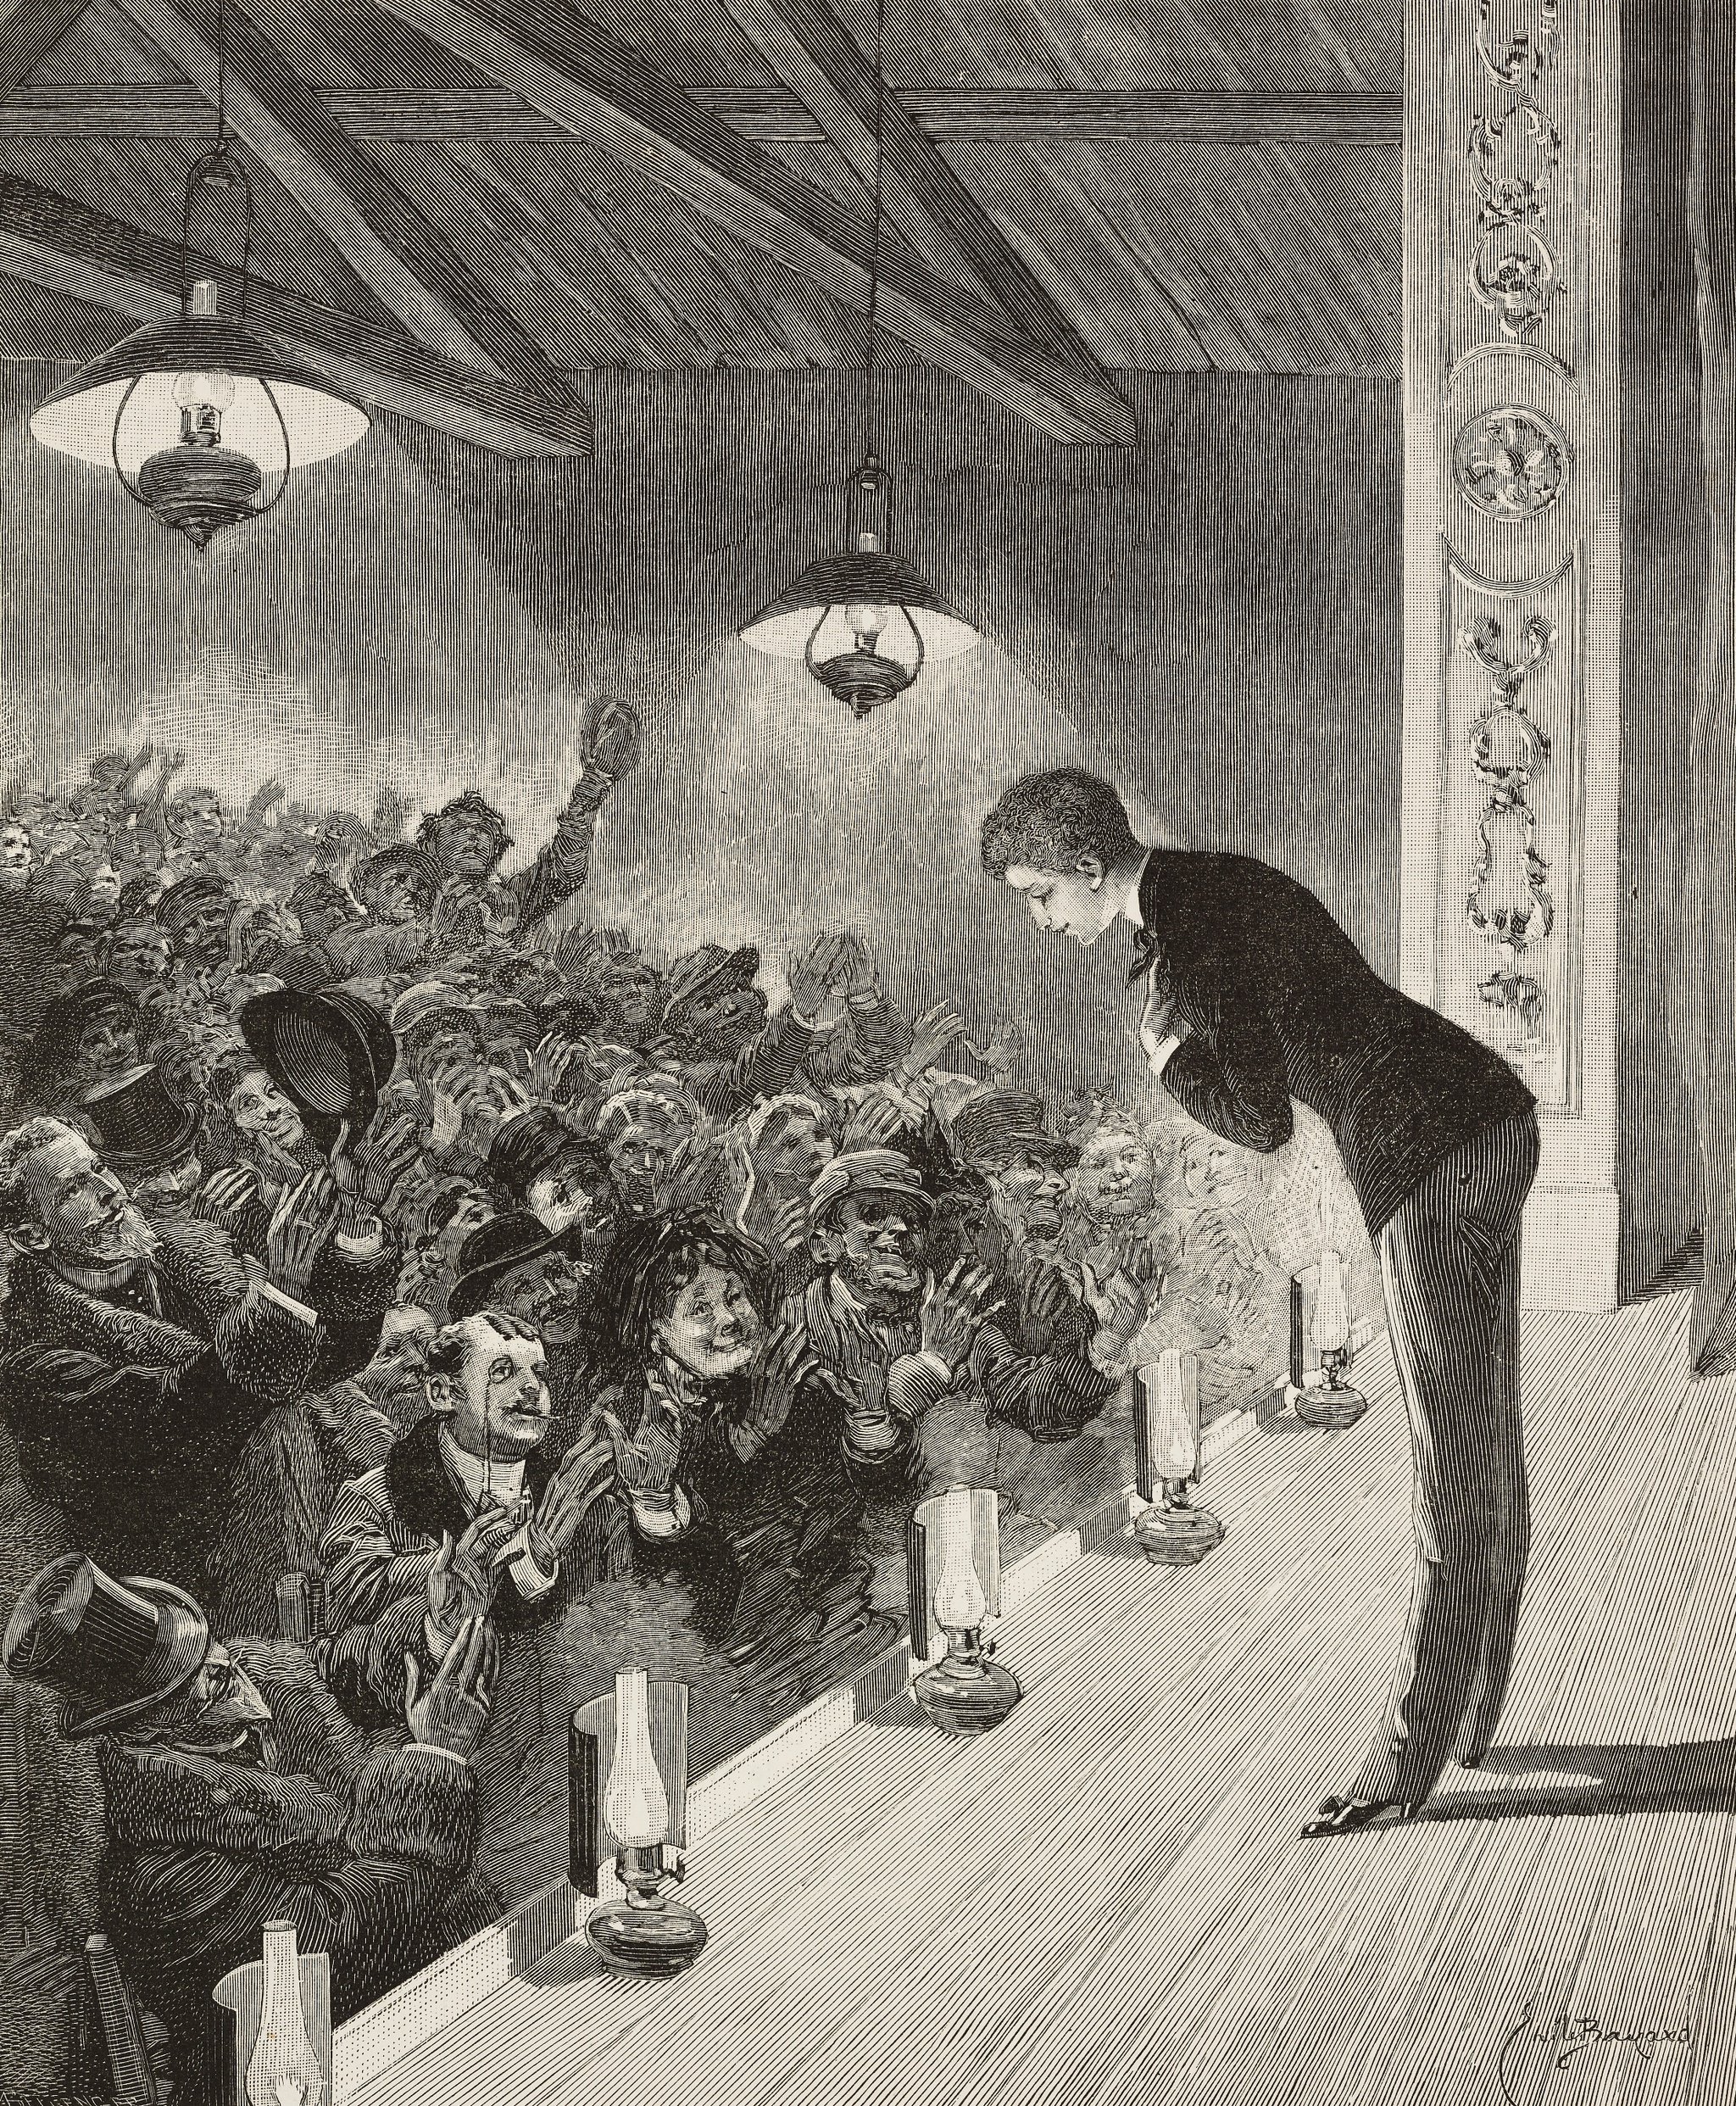 A 19th-century drawing of a man bowing on stage in front of an audience